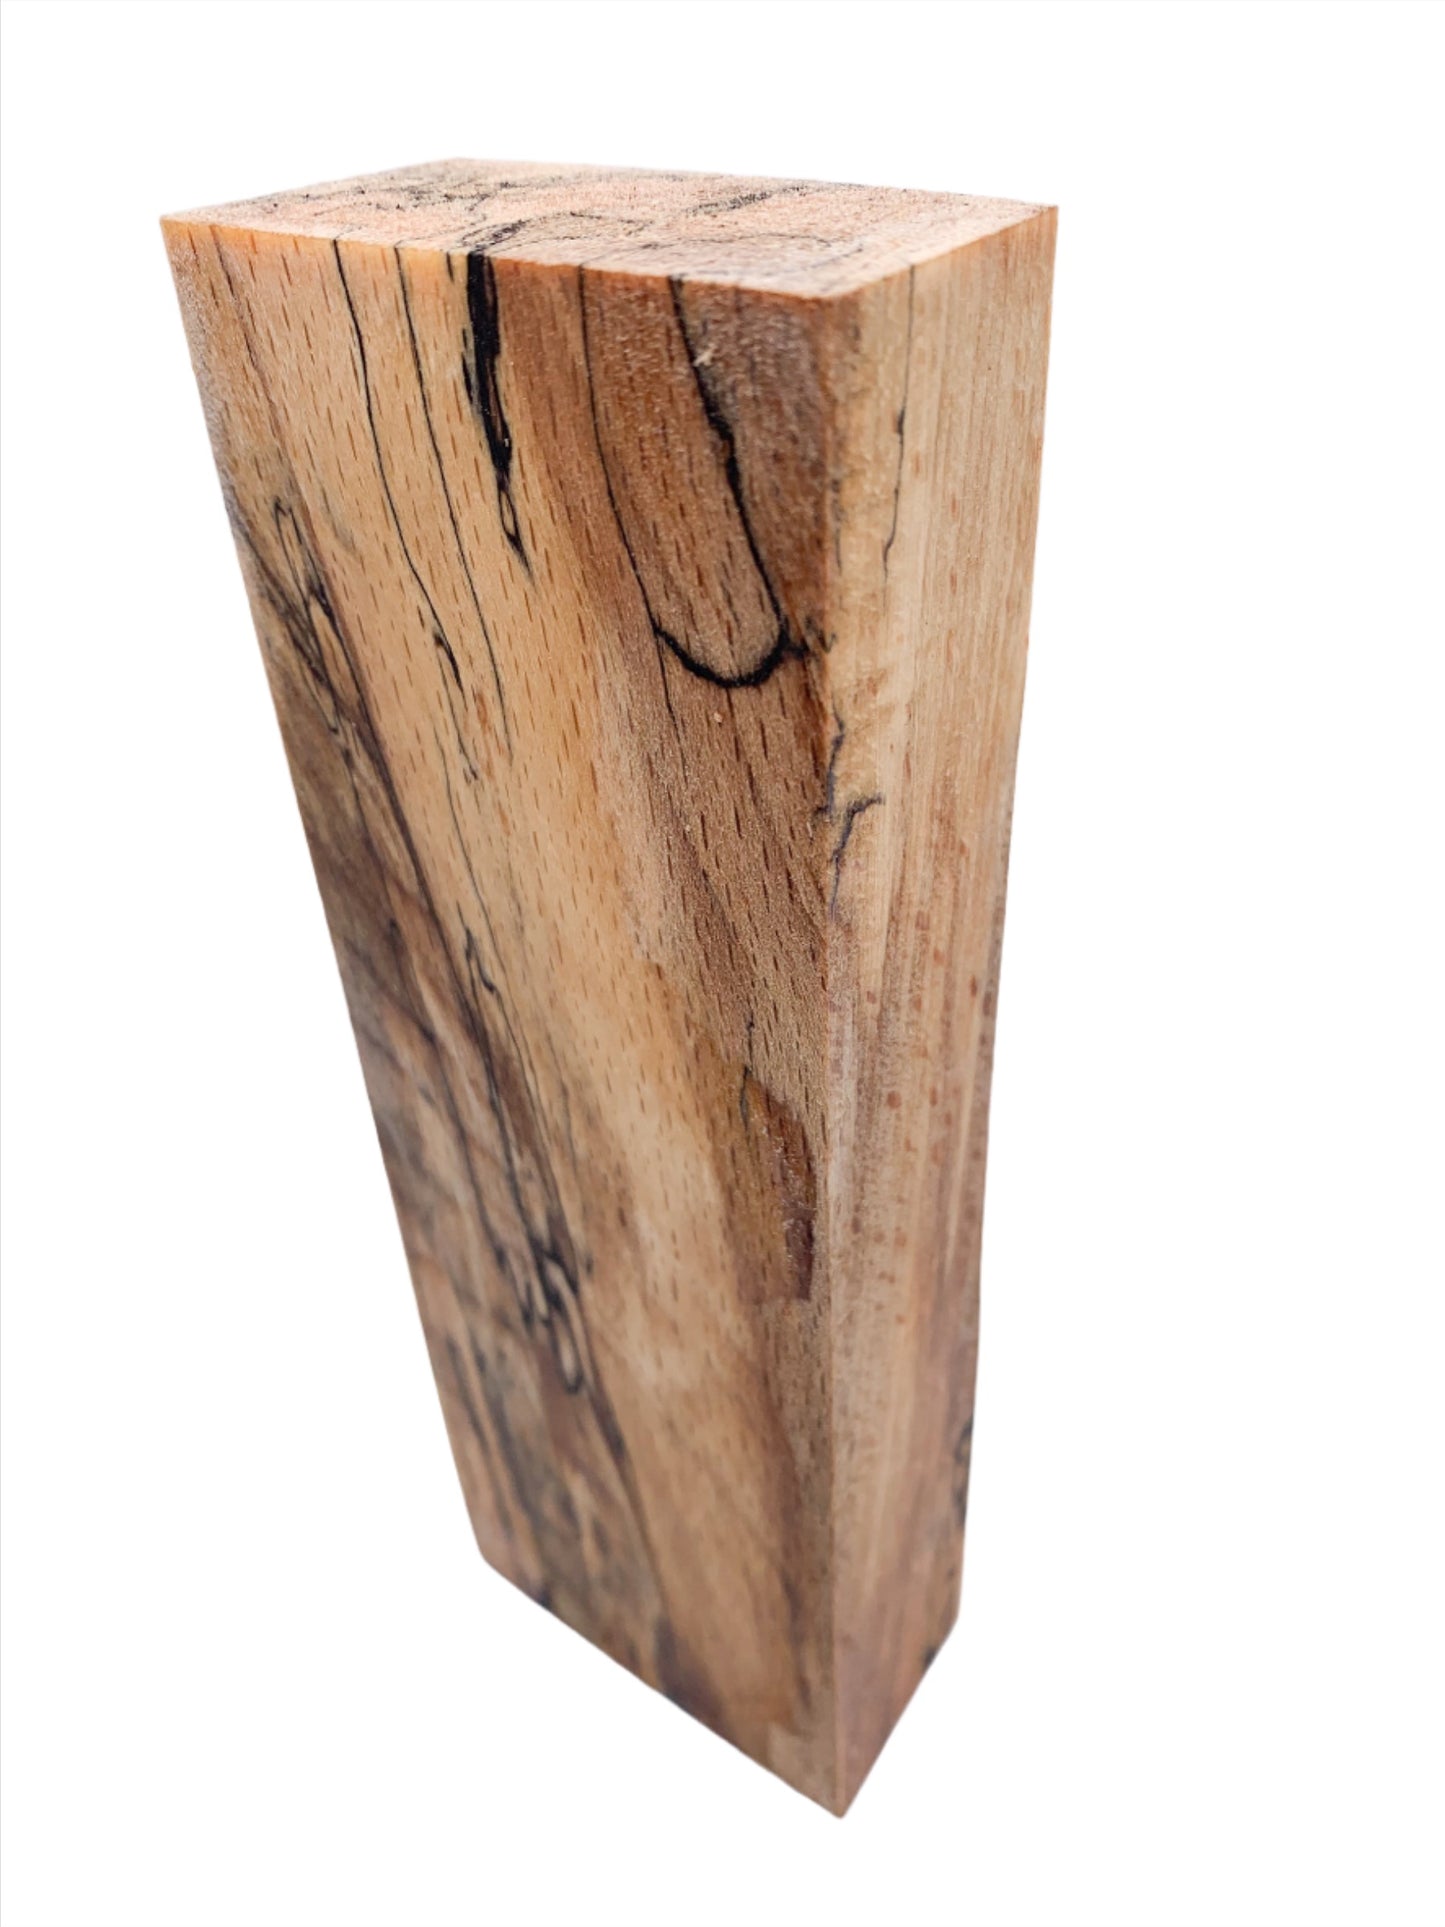 Spalted Beech Wood Knife Scale / Craft Blank | Fully Stabilised | 160x56x30 | Wooden Knife Handle